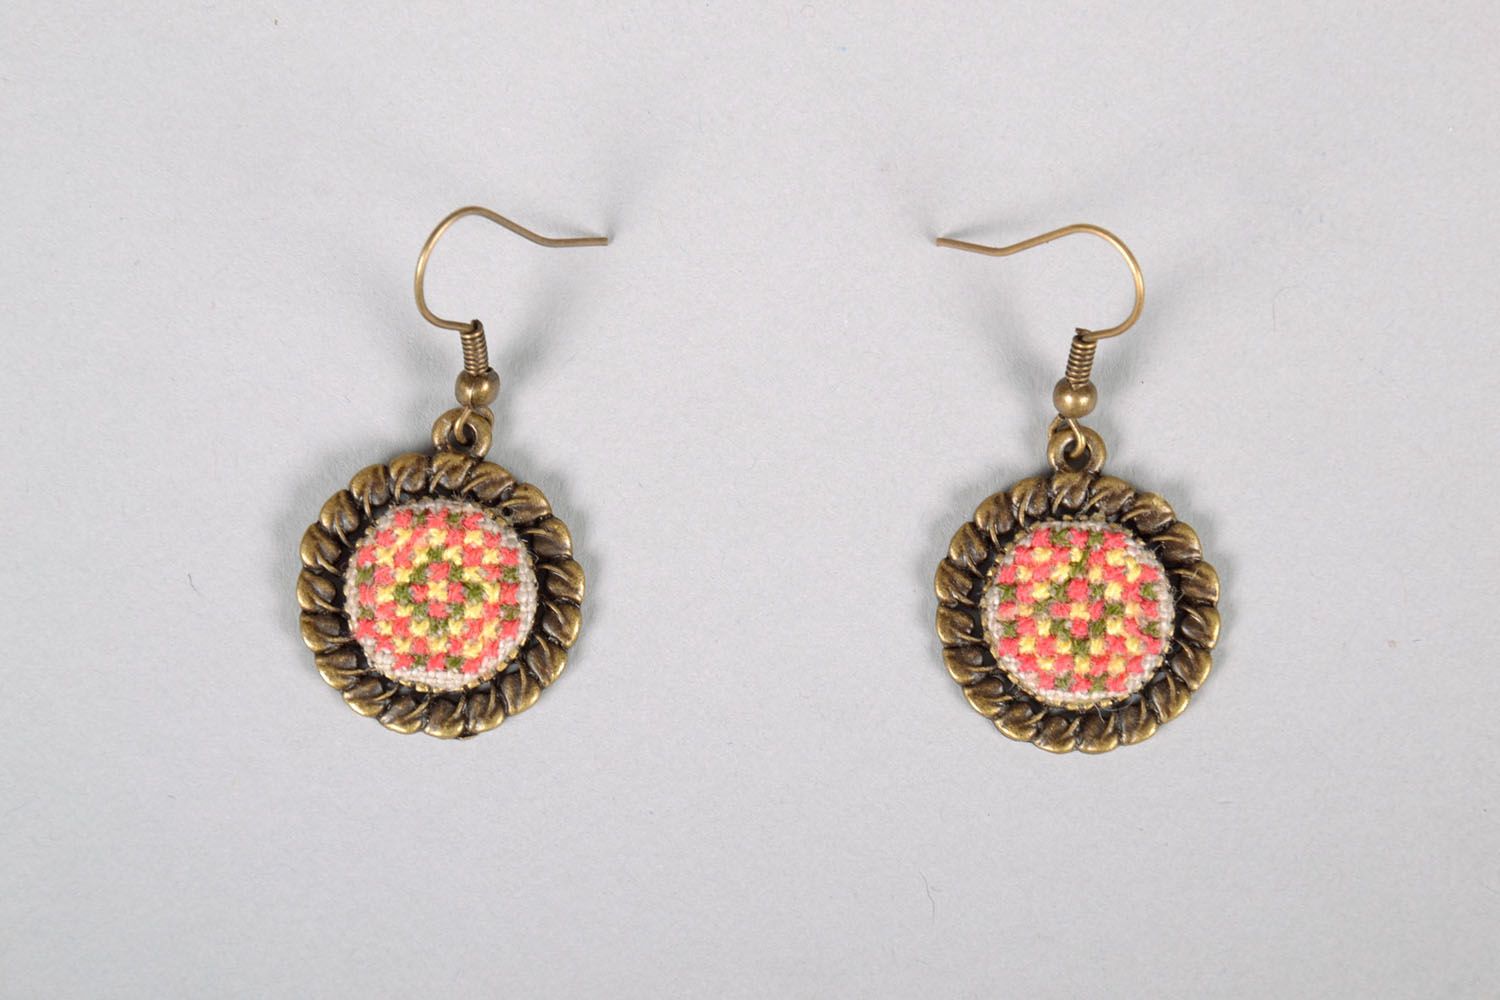 Earrings with cross stitch embroidery photo 2